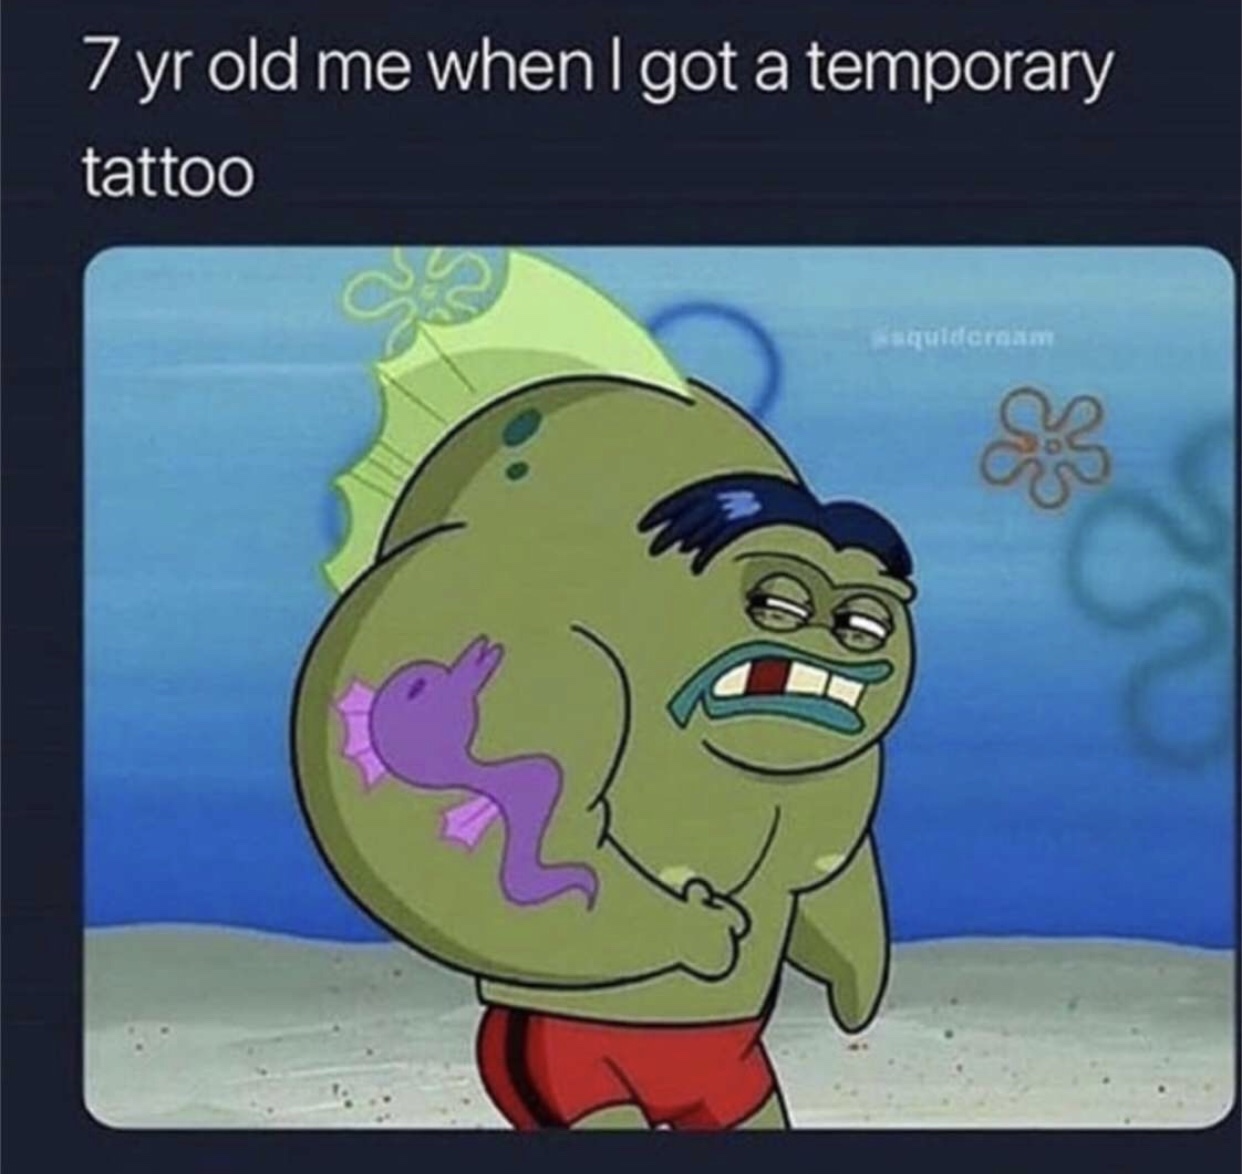 7 year old me when i get a tempor - 7 yr old me when I got a temporary tattoo quidcream